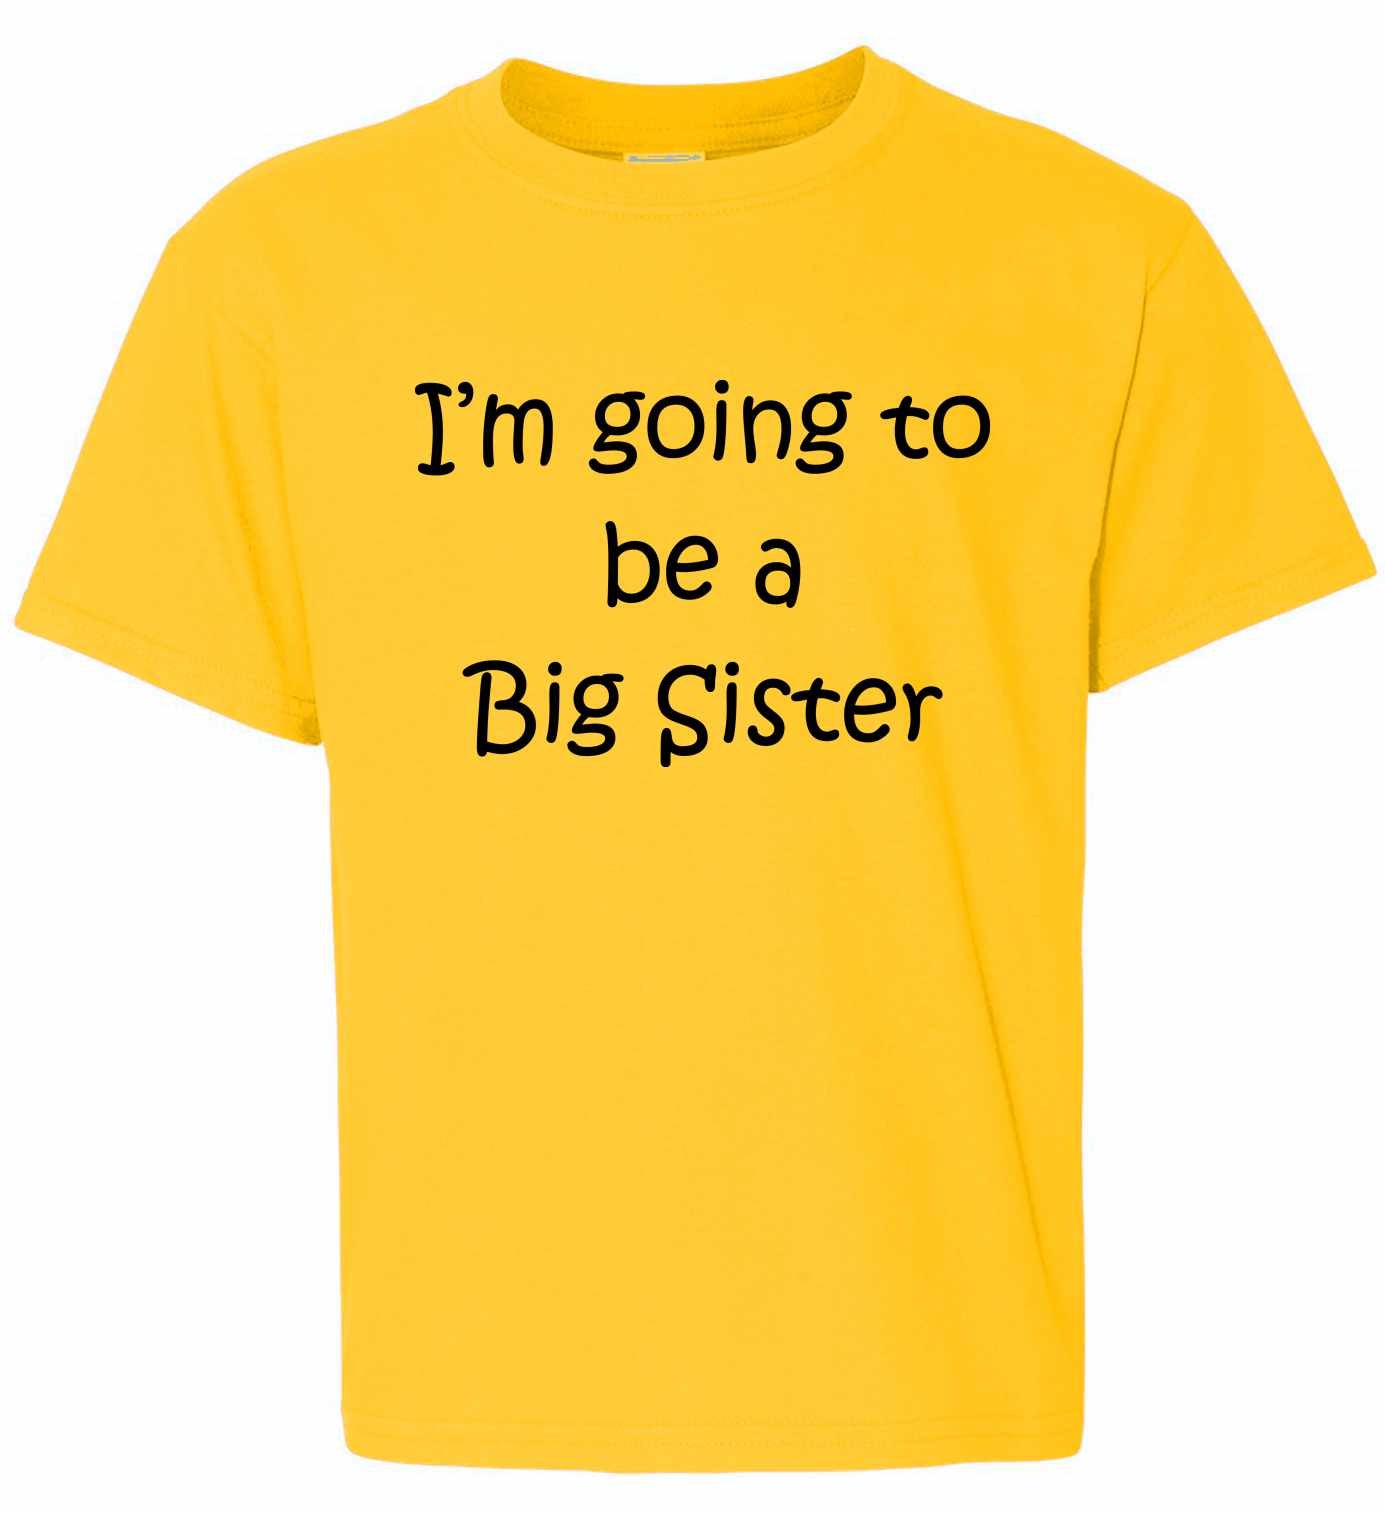 I'M GOING TO BE A BIG SISTER on Kids T-Shirt (#587-201)